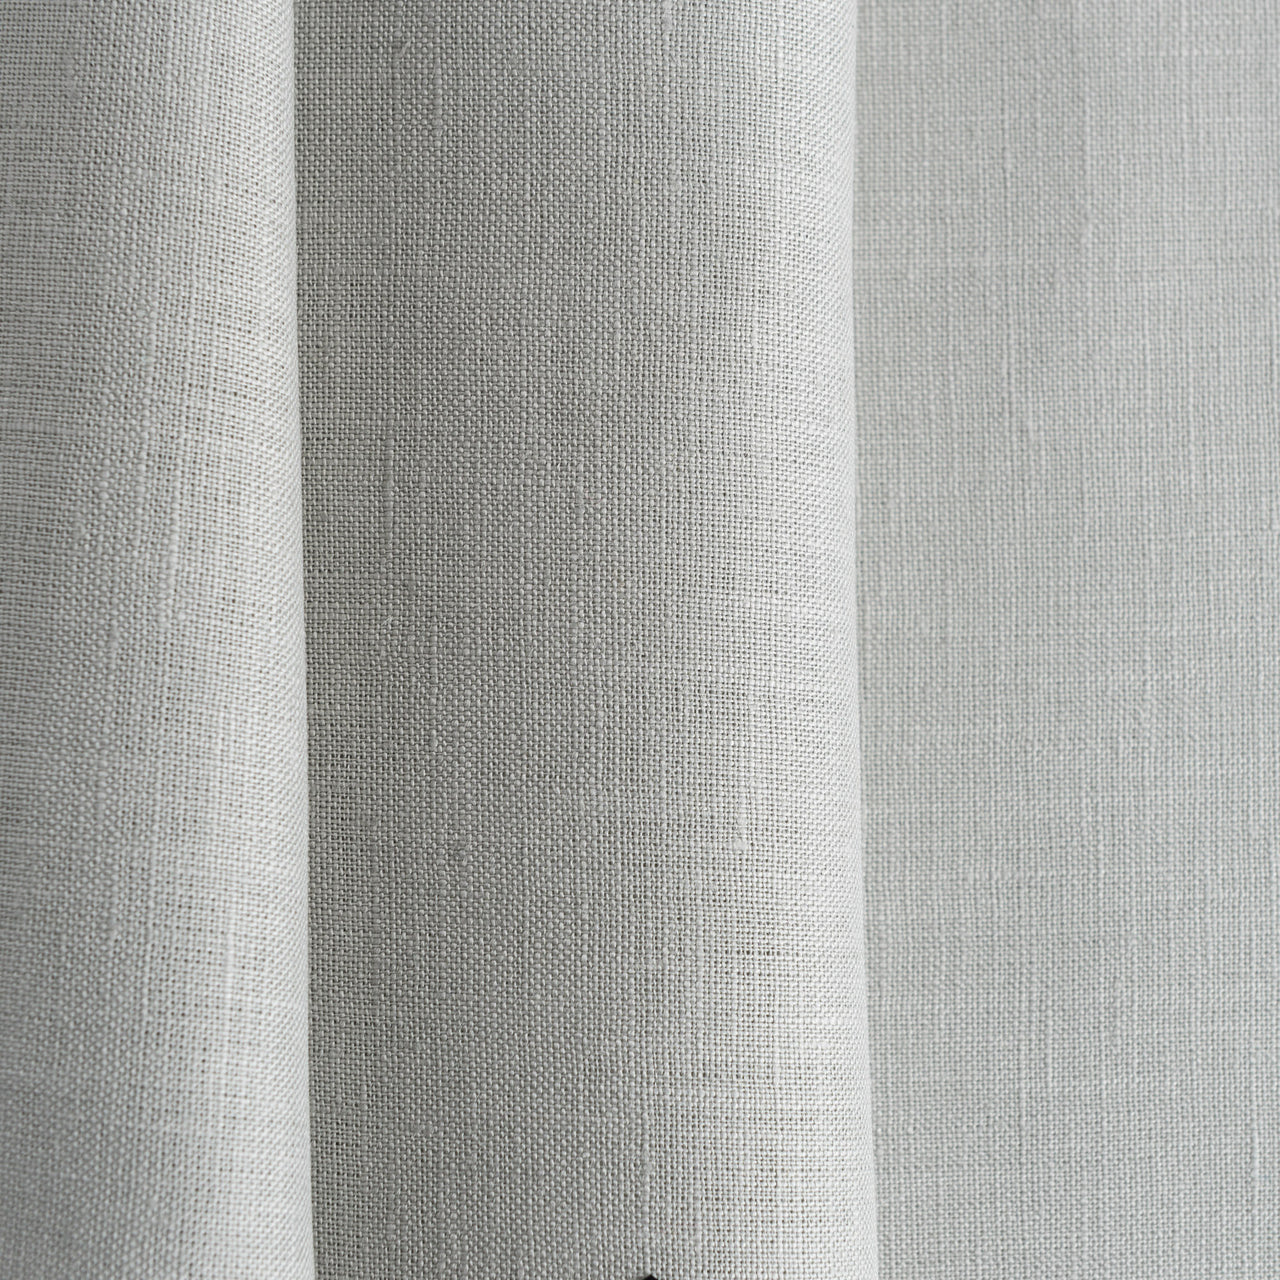 Grey Eyelet Linen Curtain Panel with Cotton Lining - Custom Sizes & Colours, Color: Stone Grey